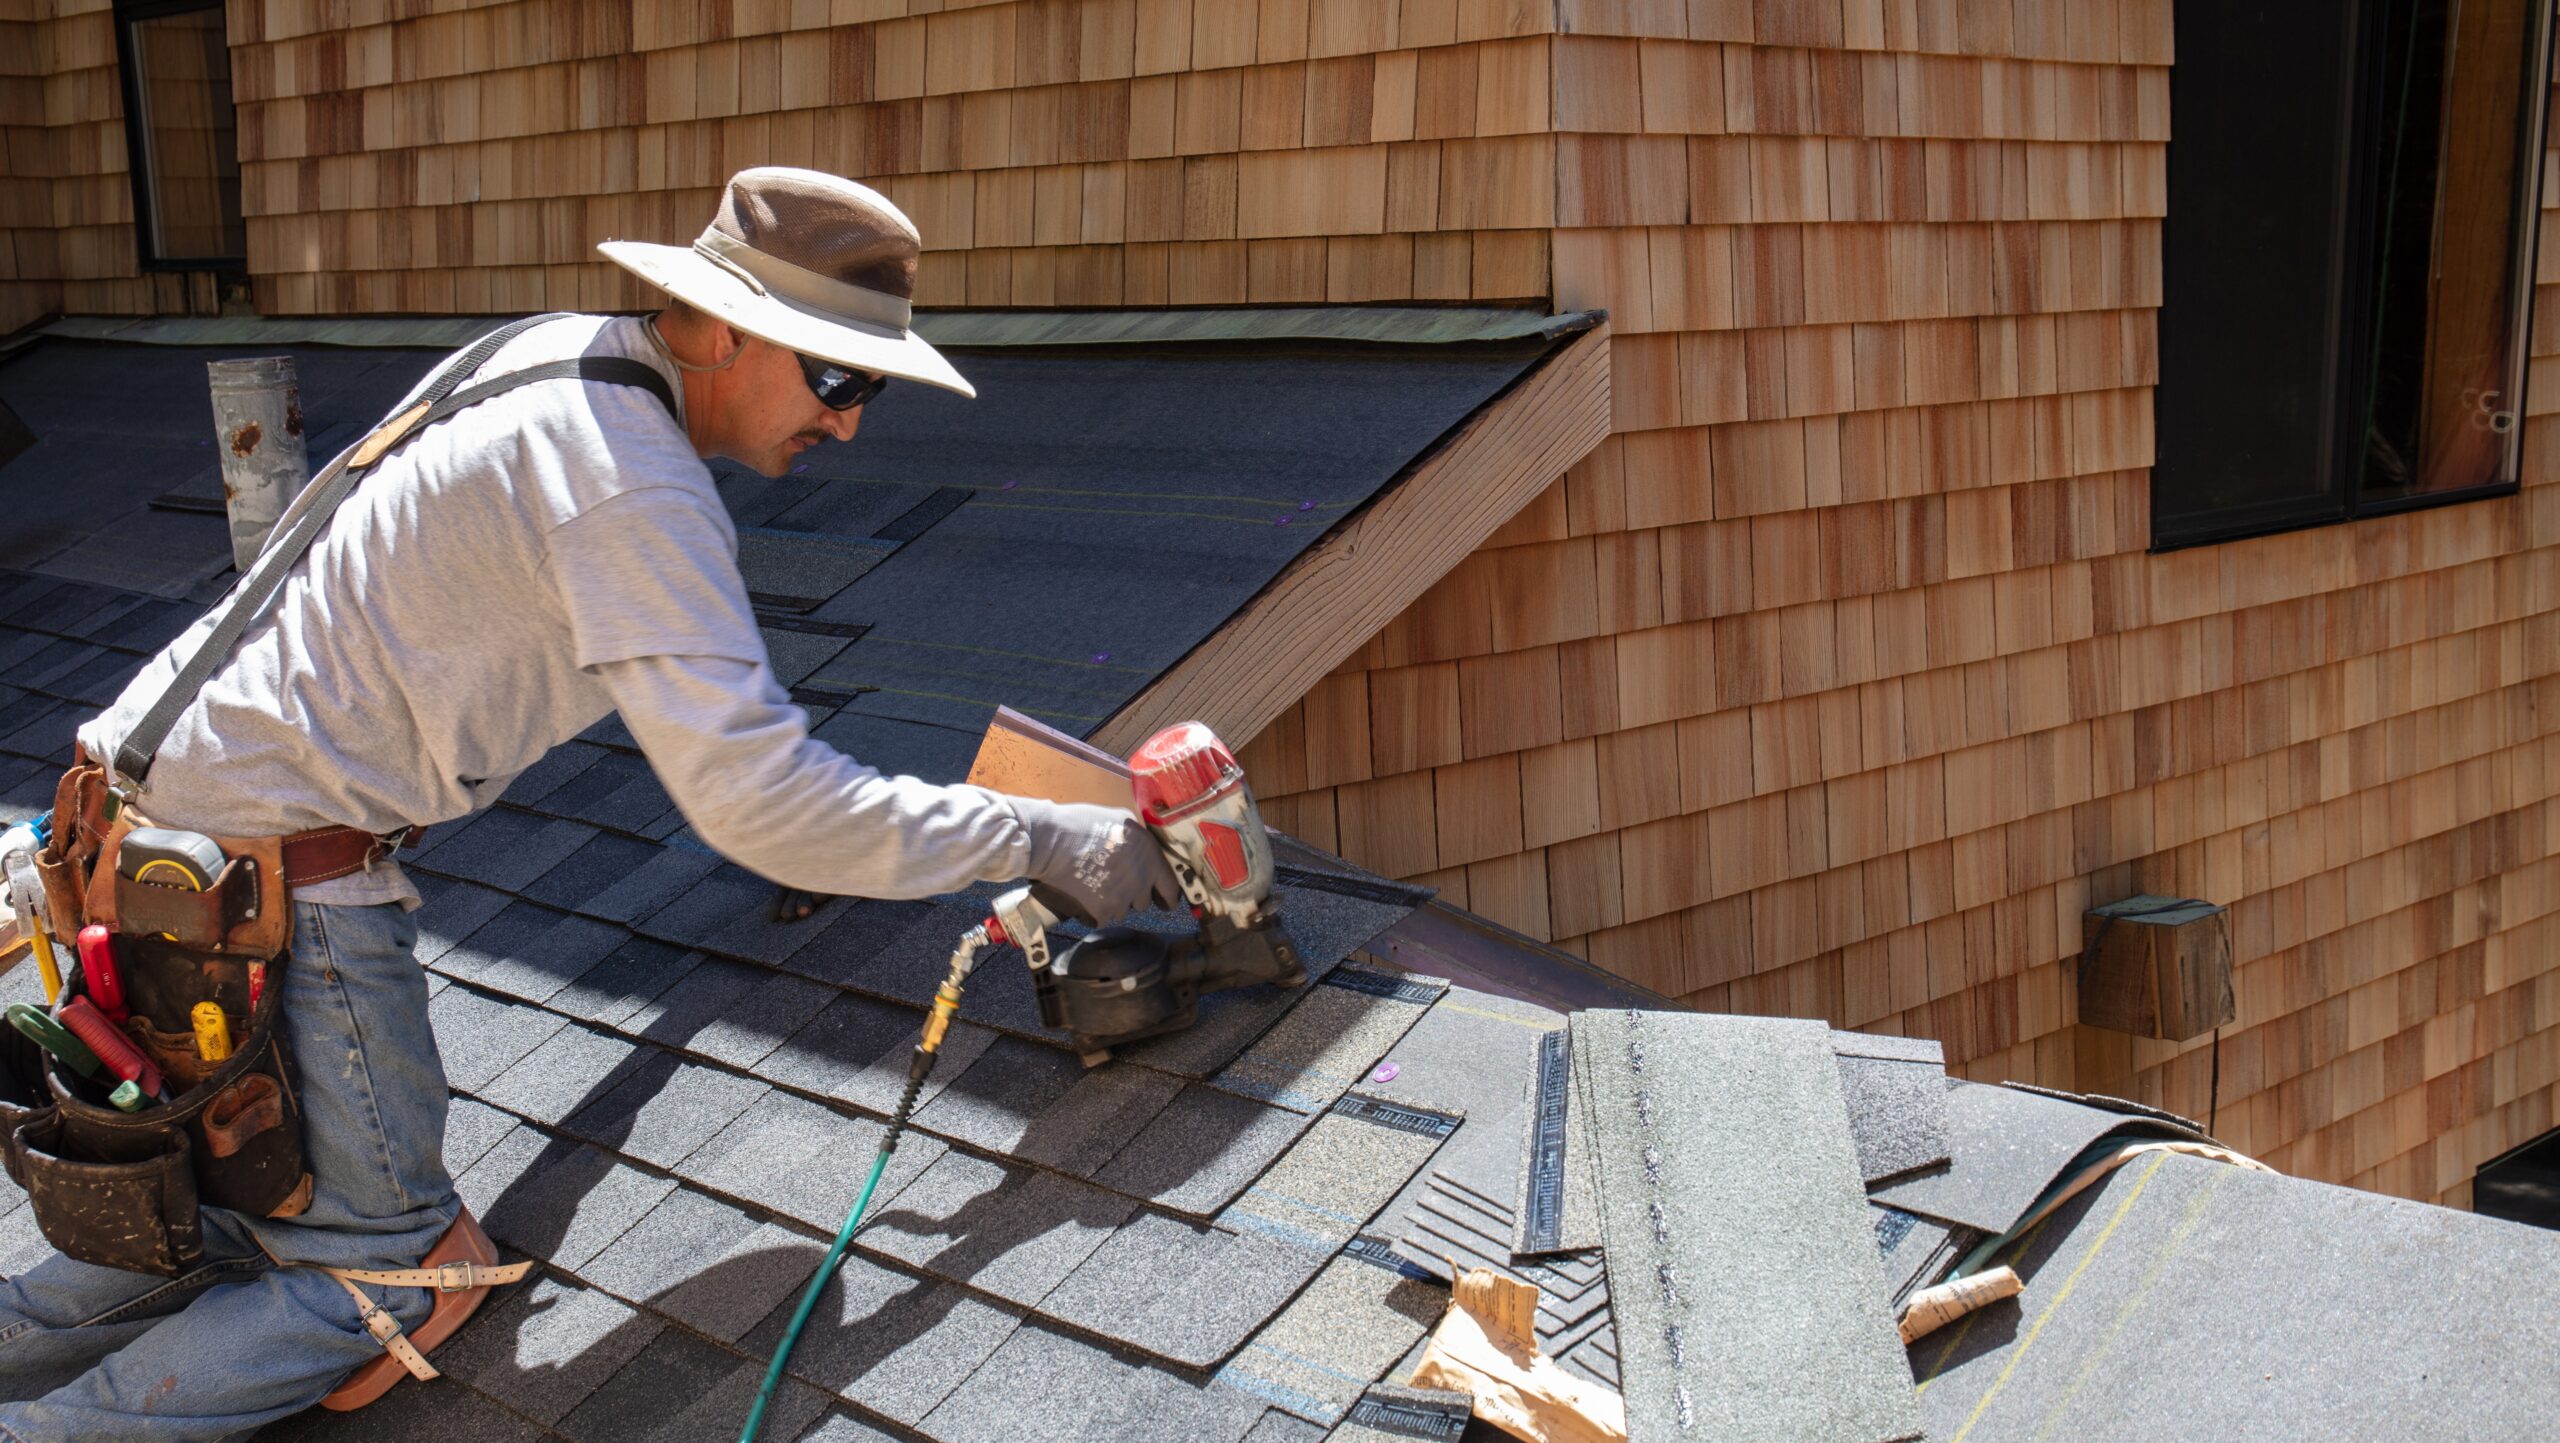 When it comes to roof repairs in Mentor, one name stands out - Nicassa Construction and Remodeling. With years of experience in the industry, they have become a trusted and reliable choice for homeowners in need of roof repair services.